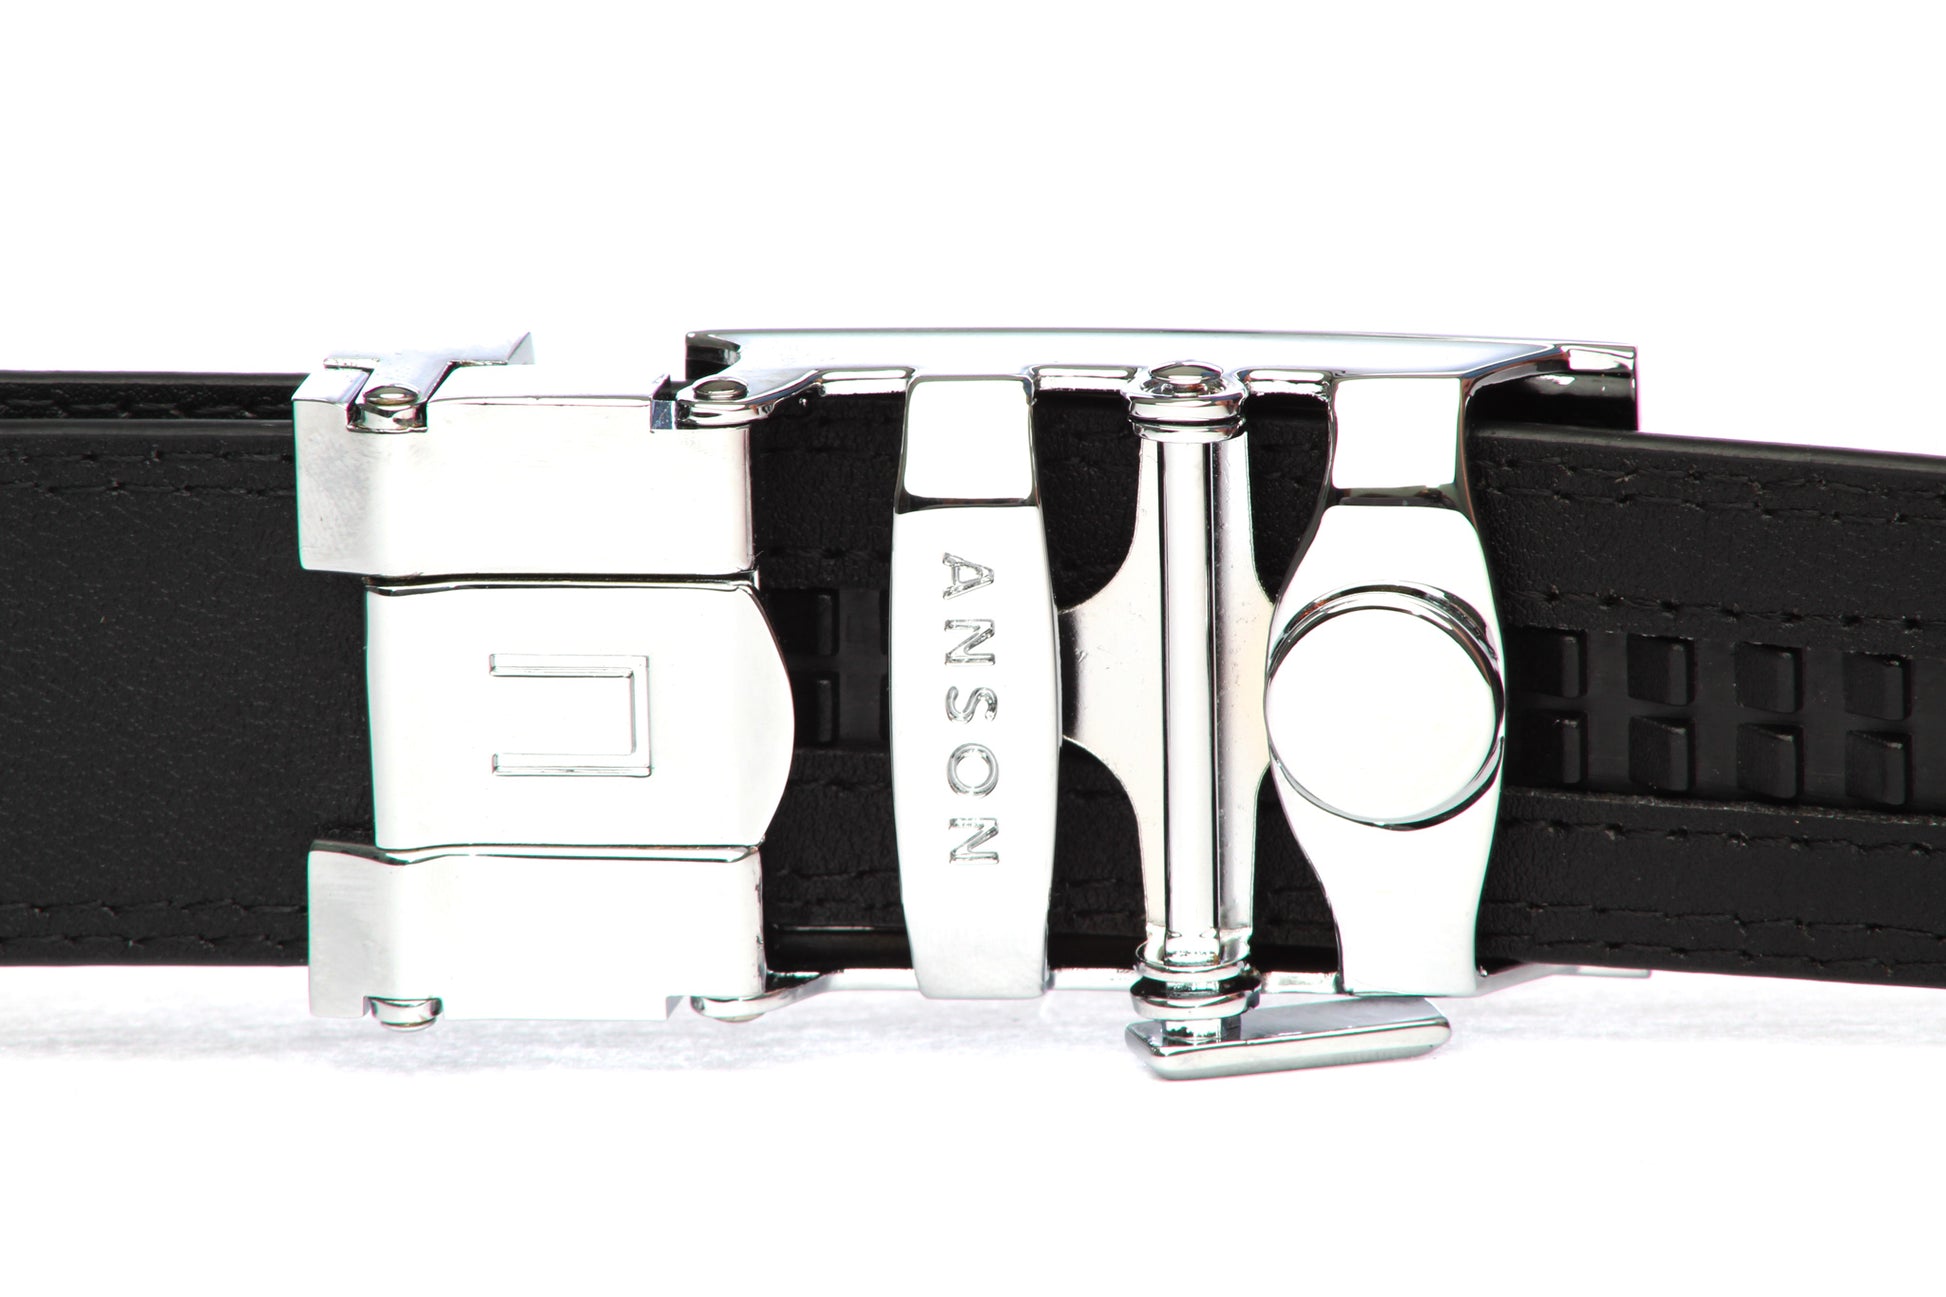 Men's onyx ratchet belt buckle in silver with a 1.25-inch width, back view.